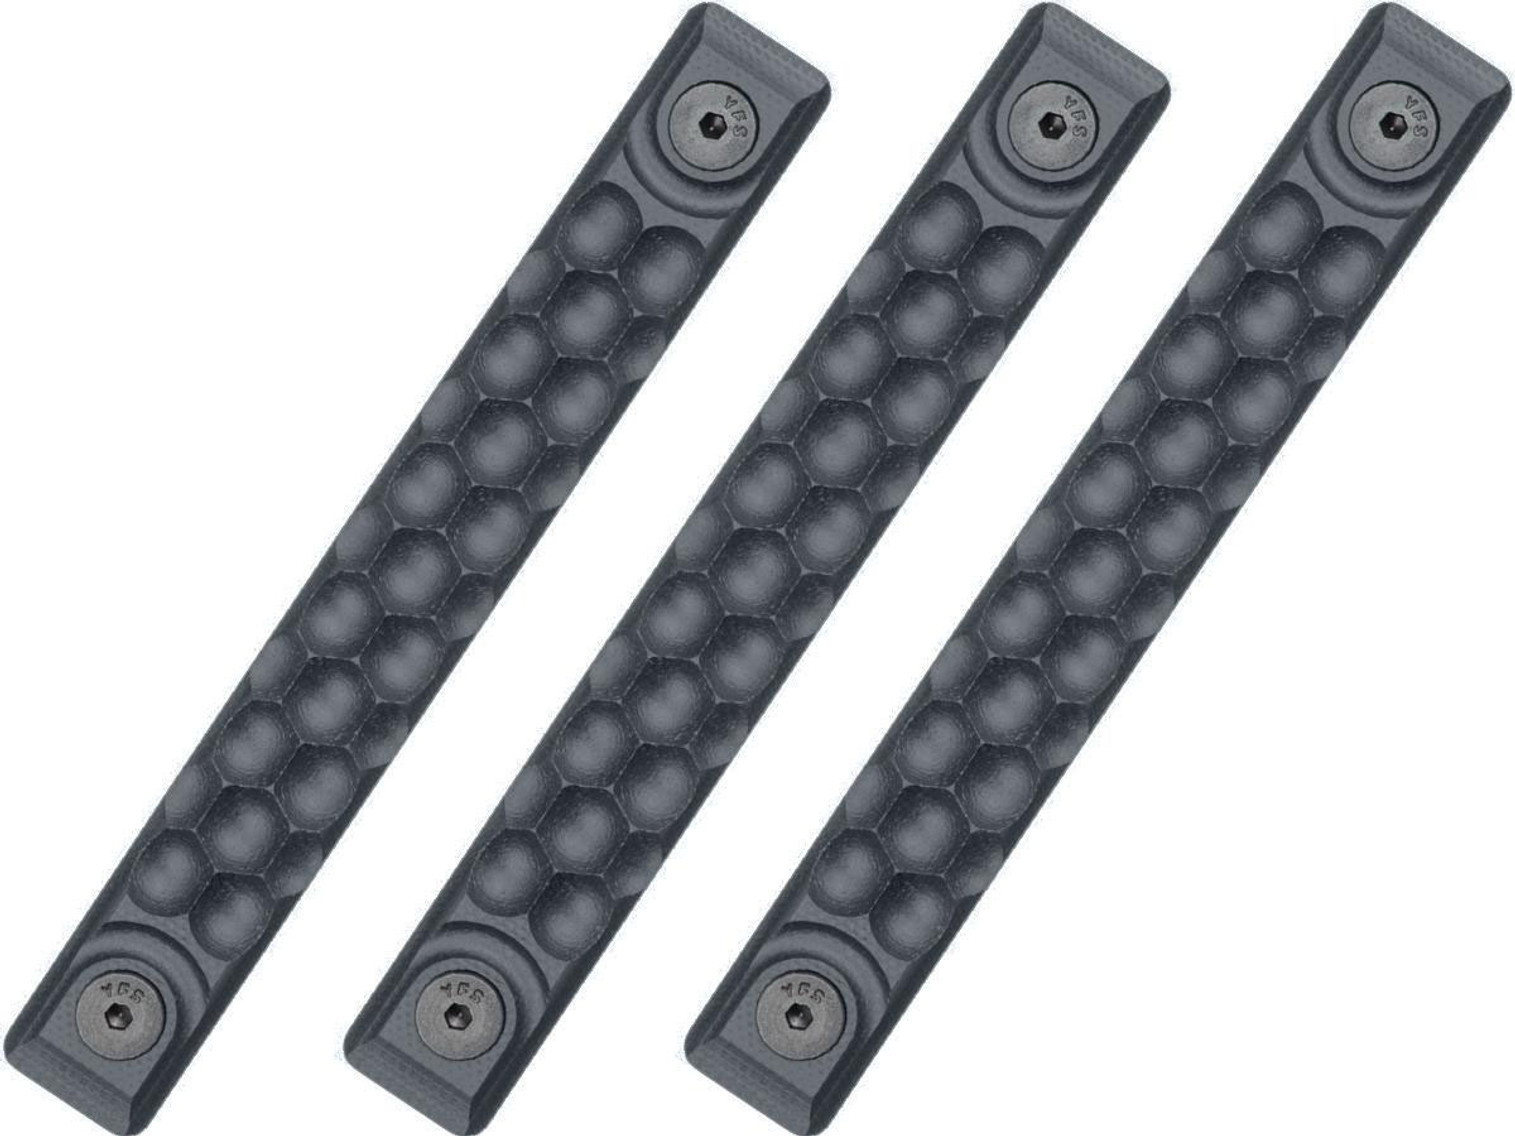 RailScales HTP Scales for Accessory Handguards (Model: Sniper Grey / M-LOK / Honeycomb / 3 Pack / 2.5 Slot)